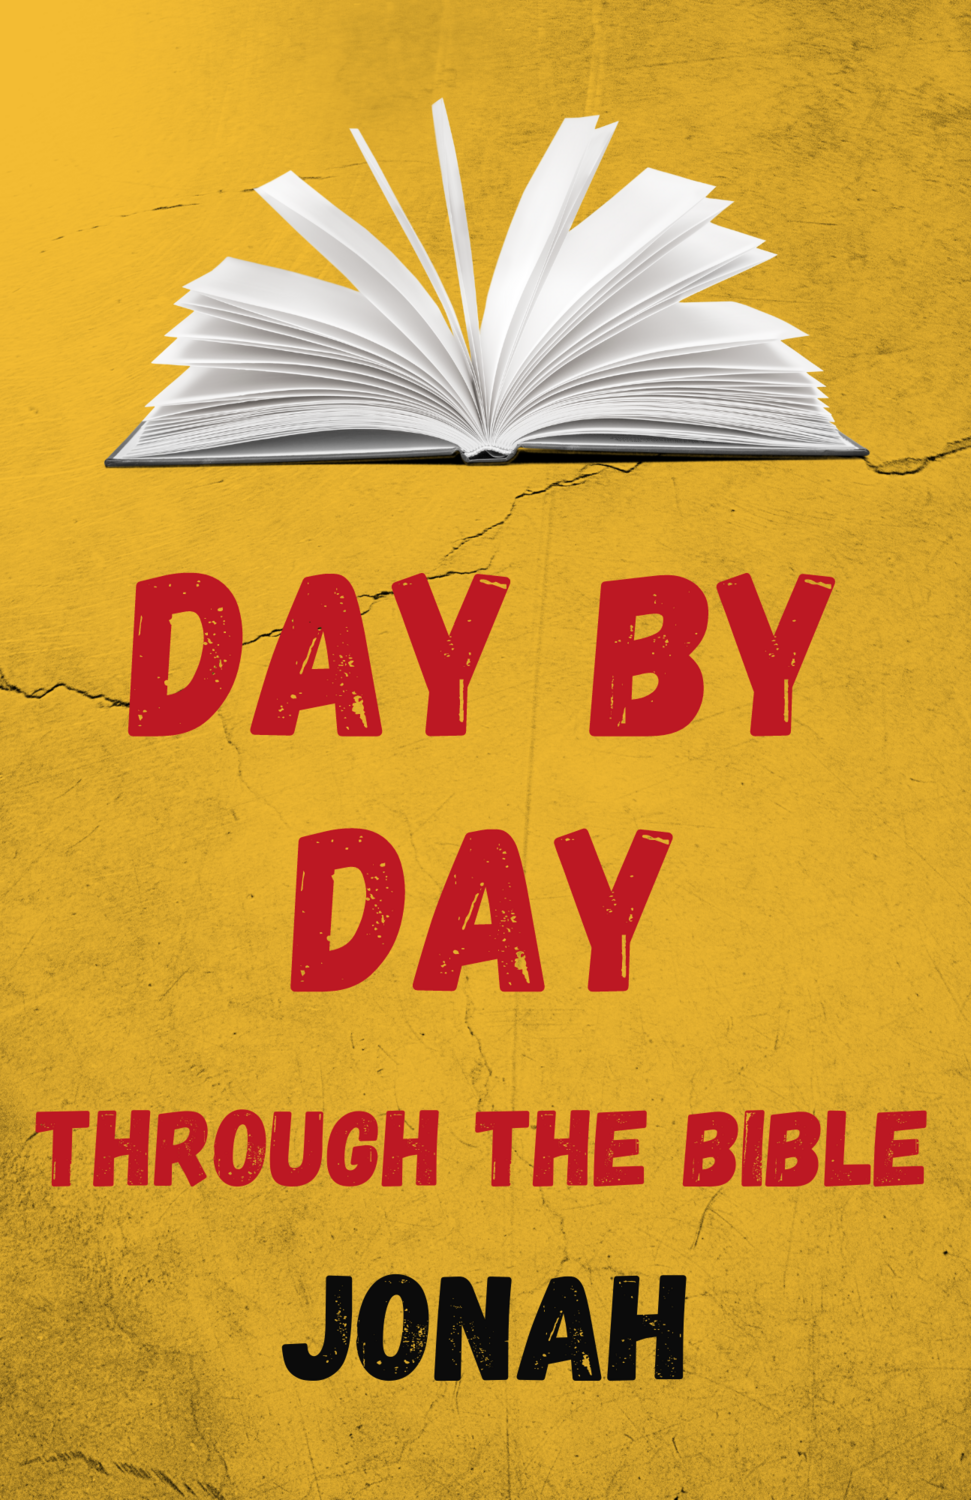 Day by Day Through the Bible: Four Days in Jonah - Digital Download